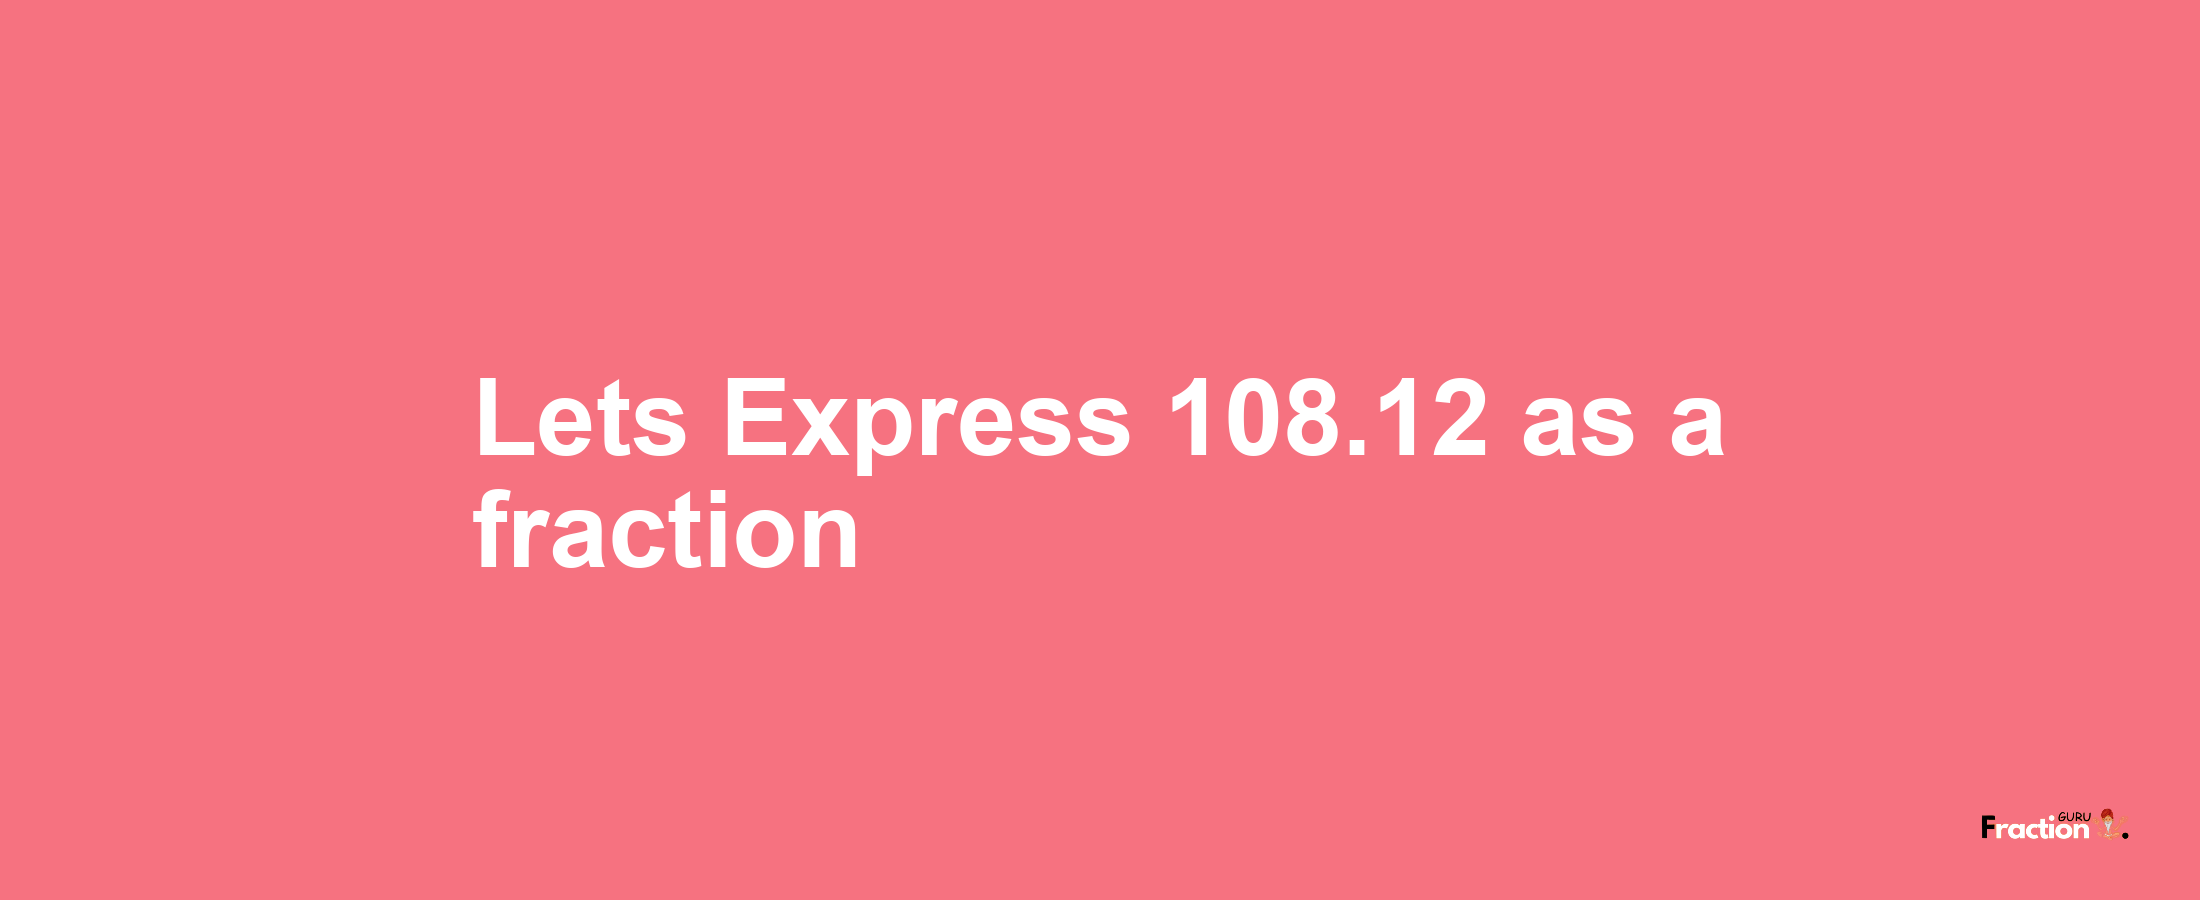 Lets Express 108.12 as afraction